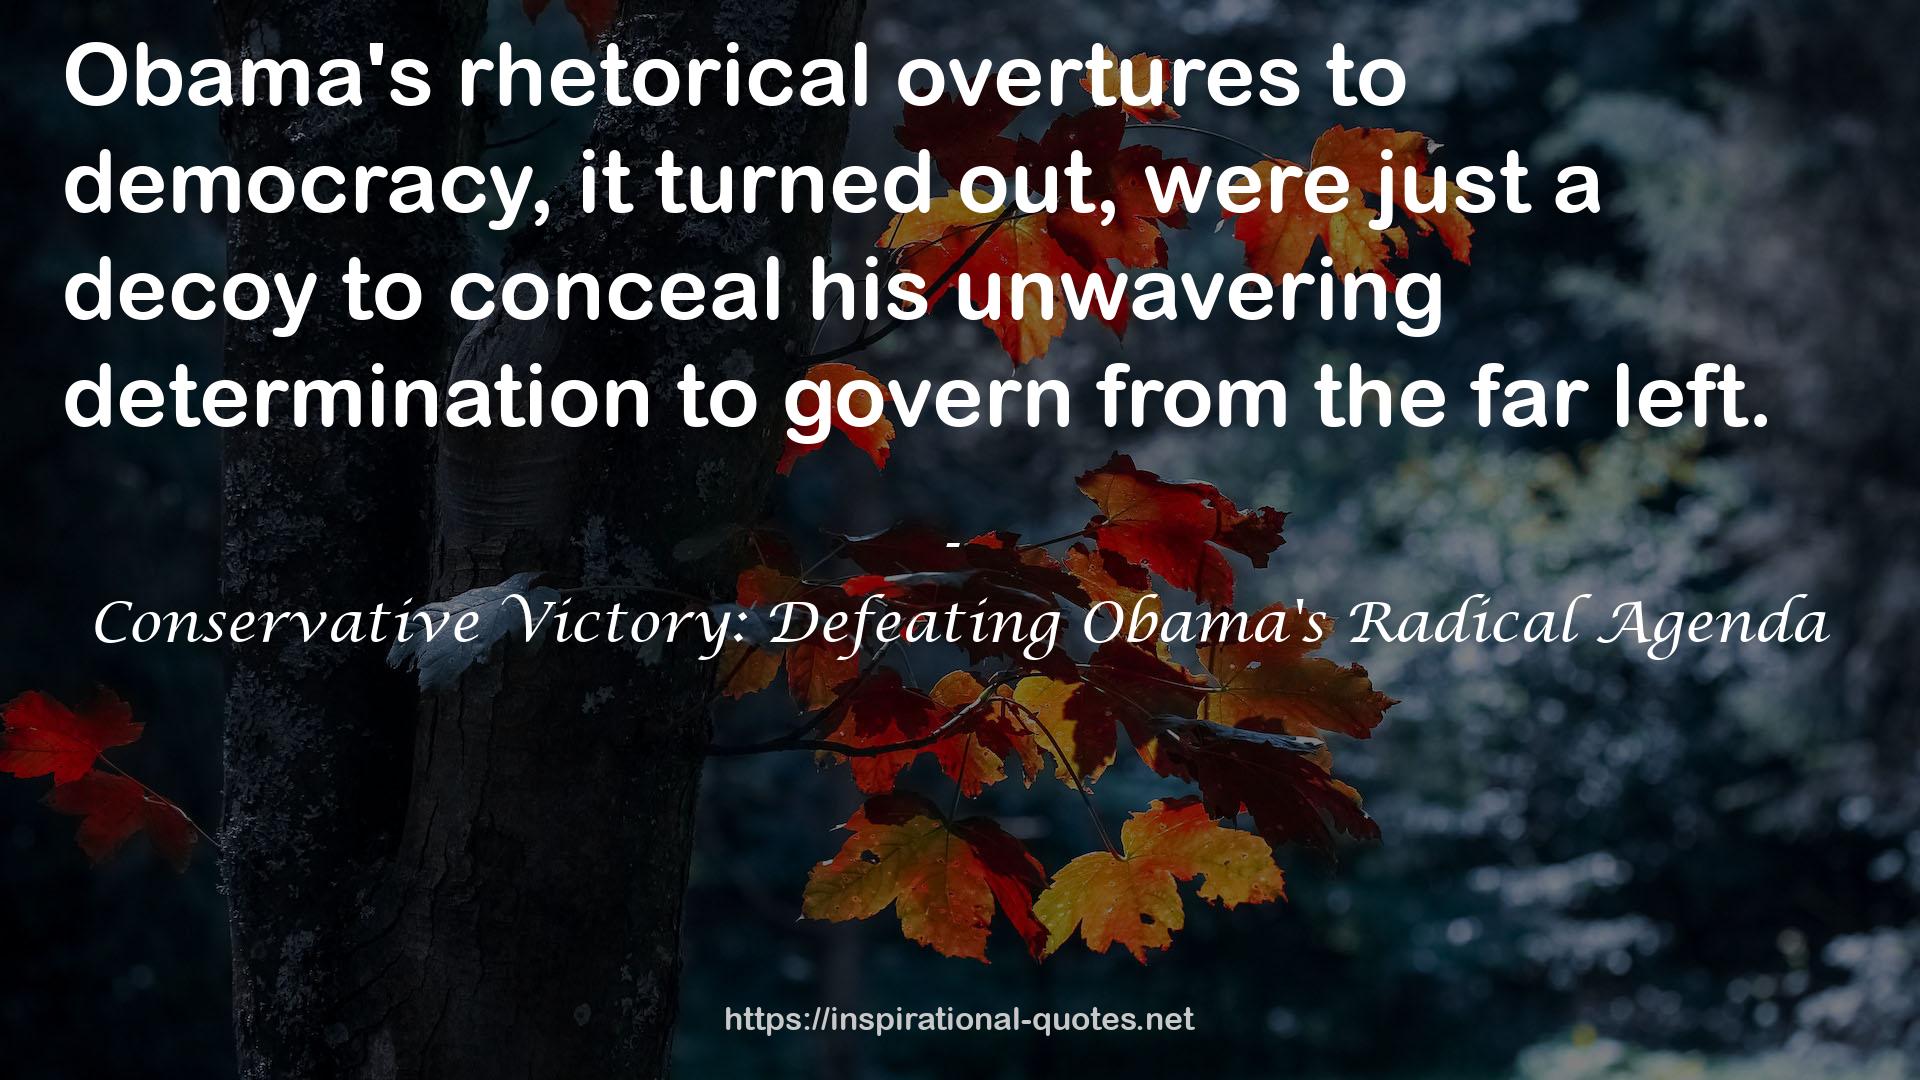 Conservative Victory: Defeating Obama's Radical Agenda QUOTES